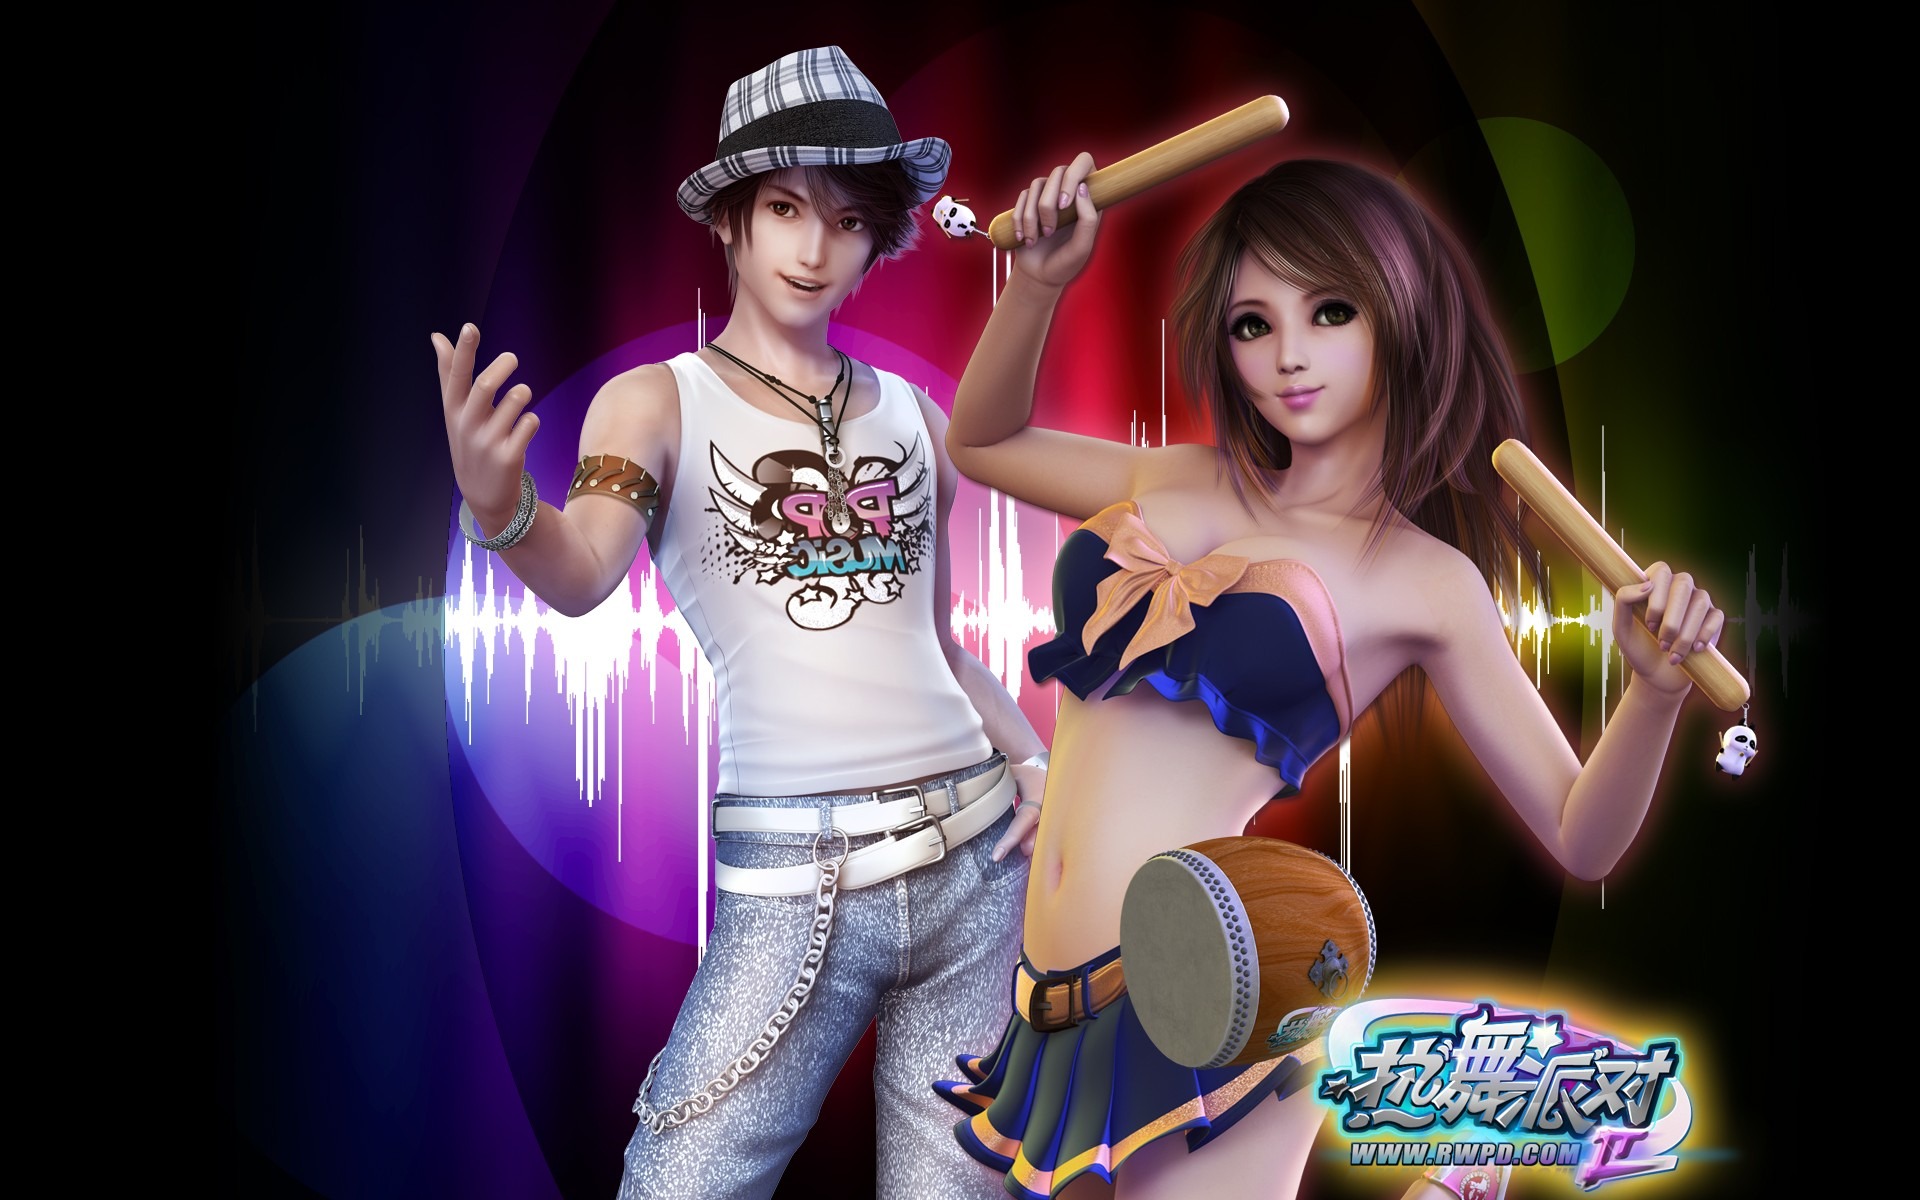 Online game Hot Dance Party II official wallpapers #20 - 1920x1200